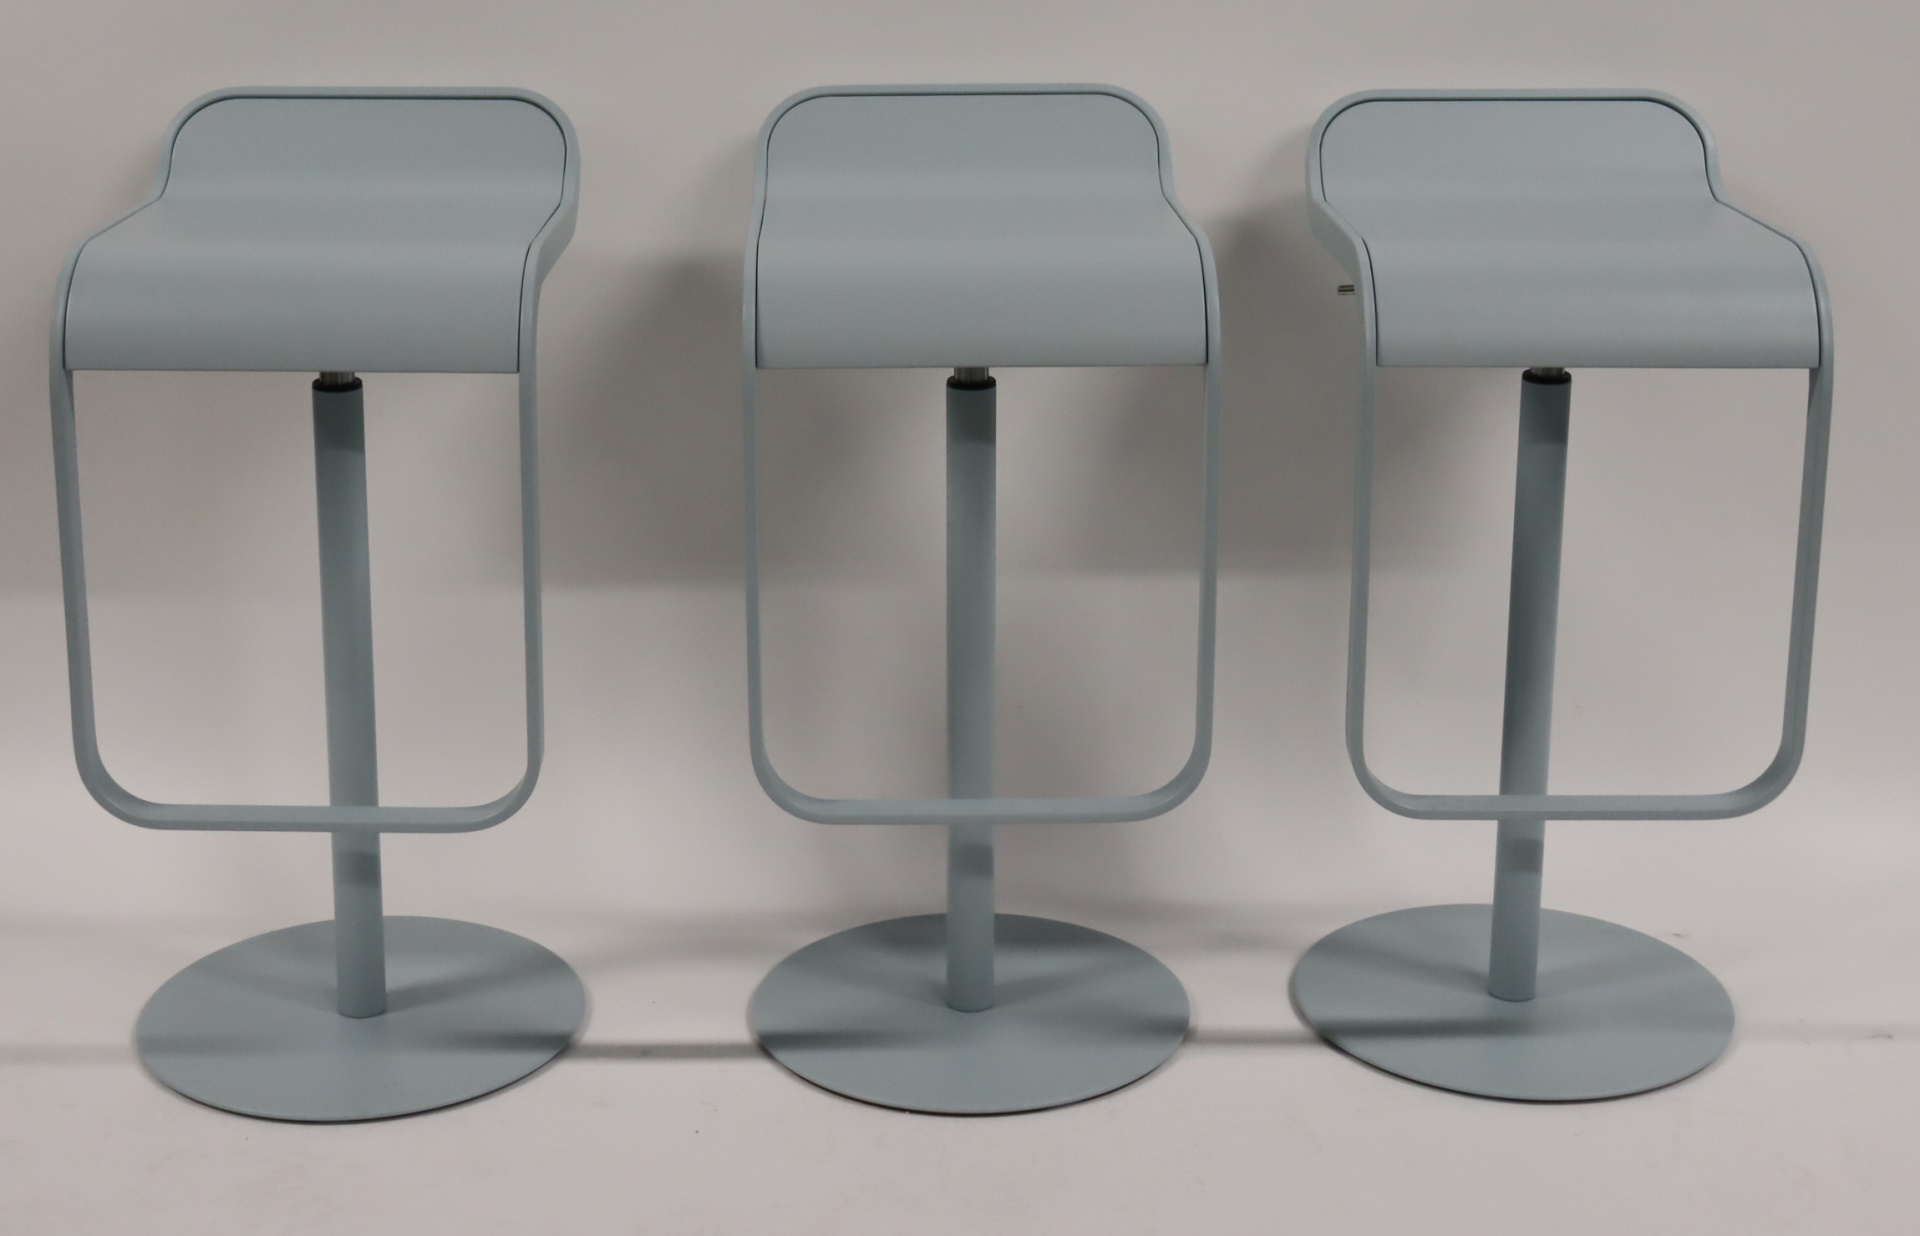 3 CONTEMPORARY STOOLS. From a Queens,